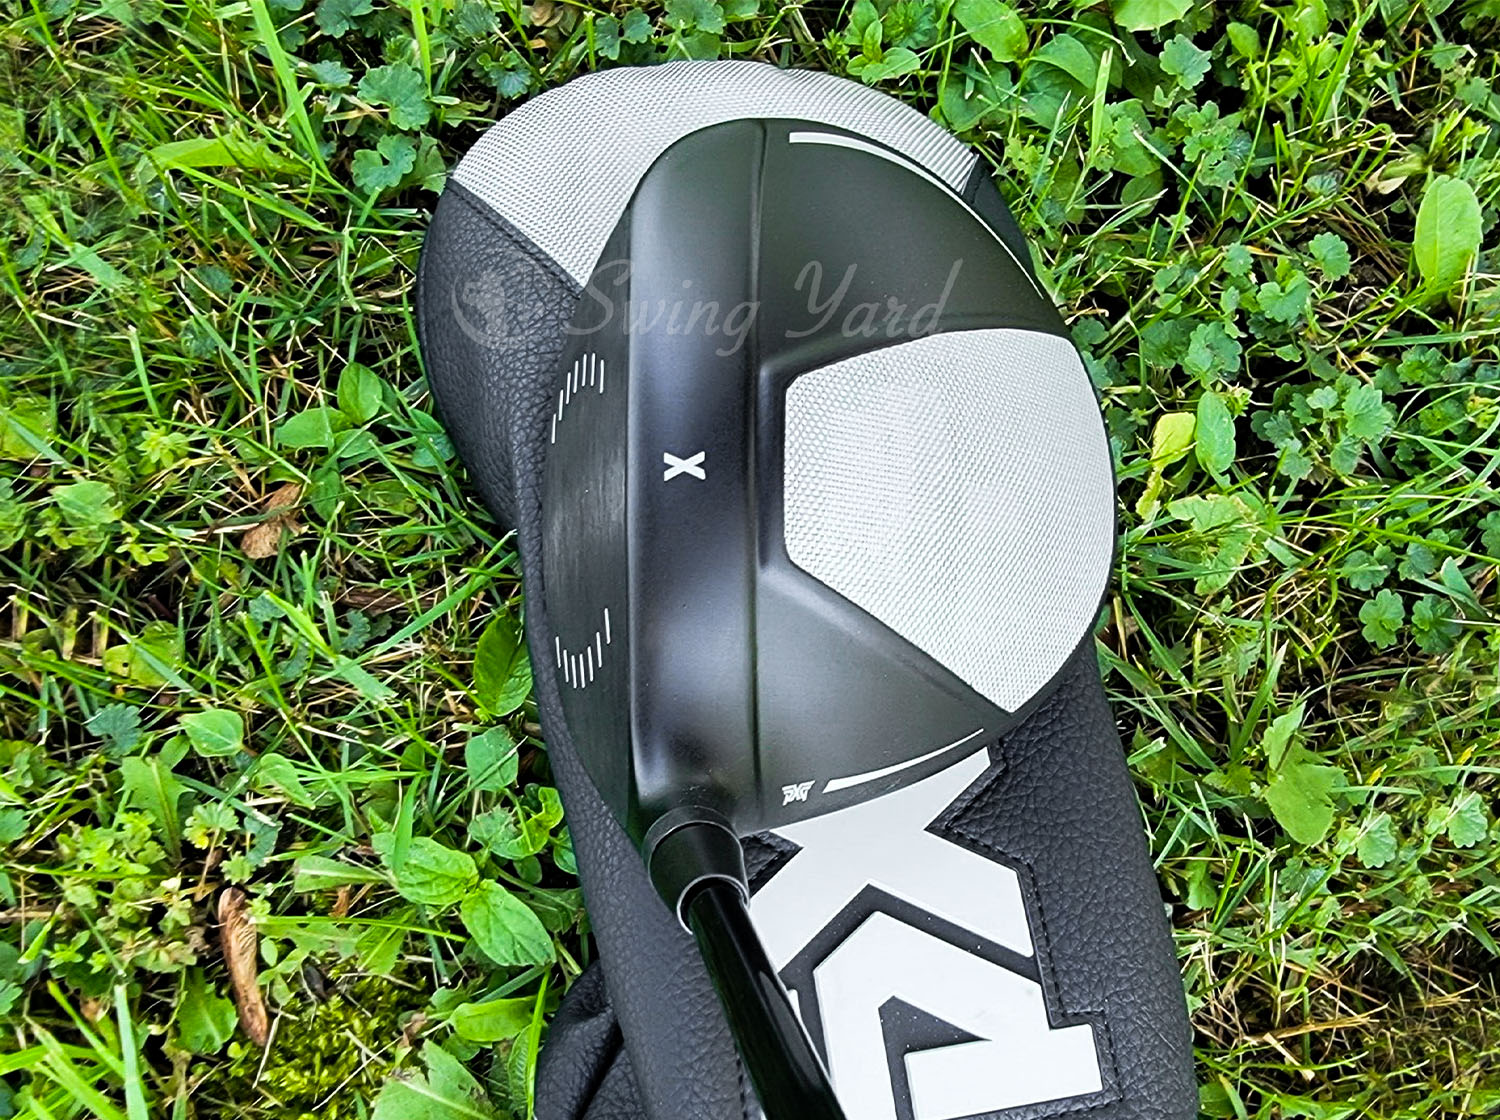 View of me standing over the PXG 0811XF driver